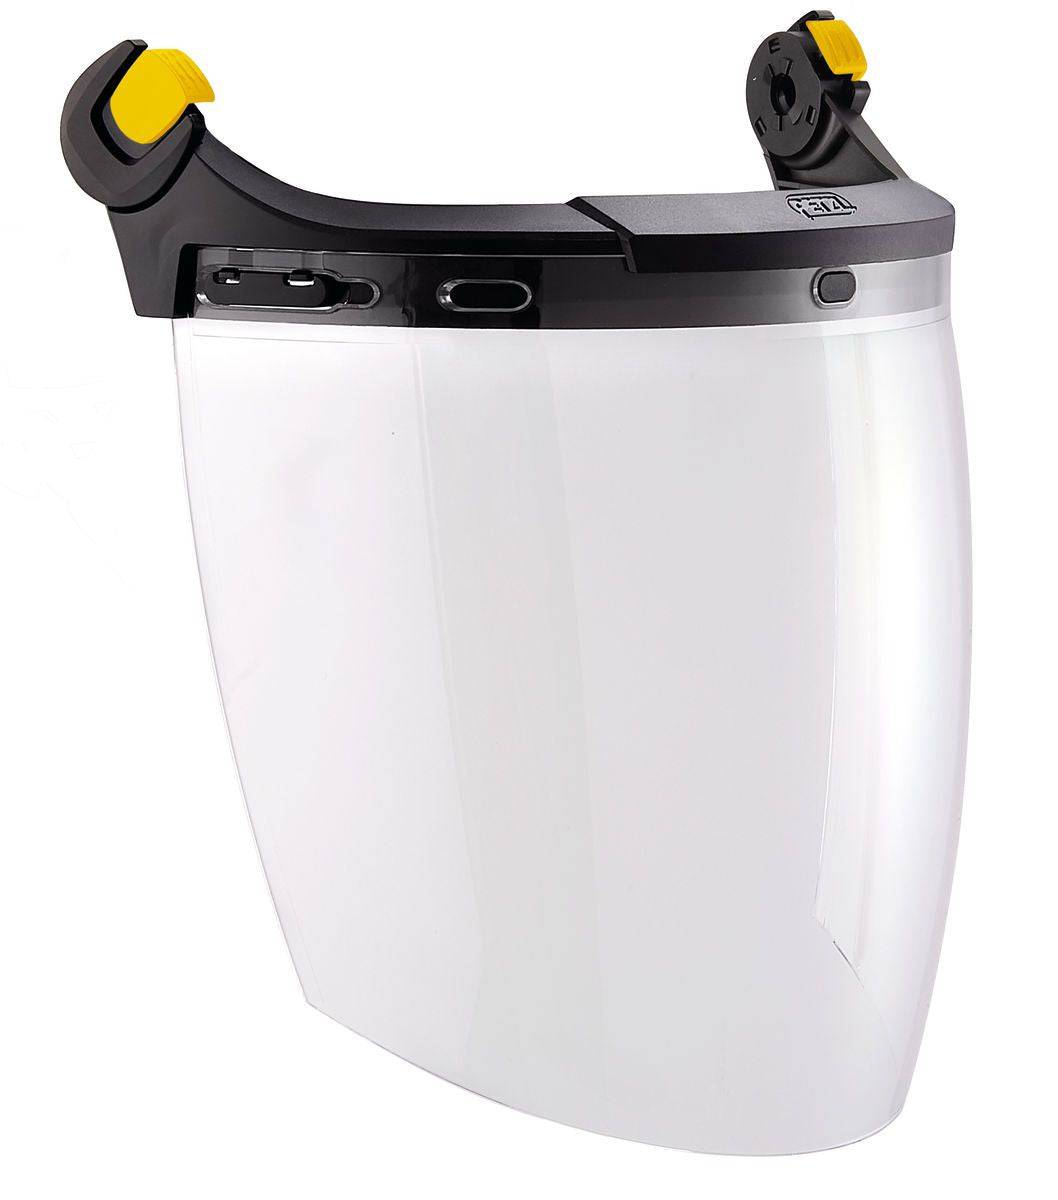 Petzl VIZEN Electric Arc Hazard Protection Face Shield for STRATO and VERTEX Helmets A014AA00 - SecureHeights